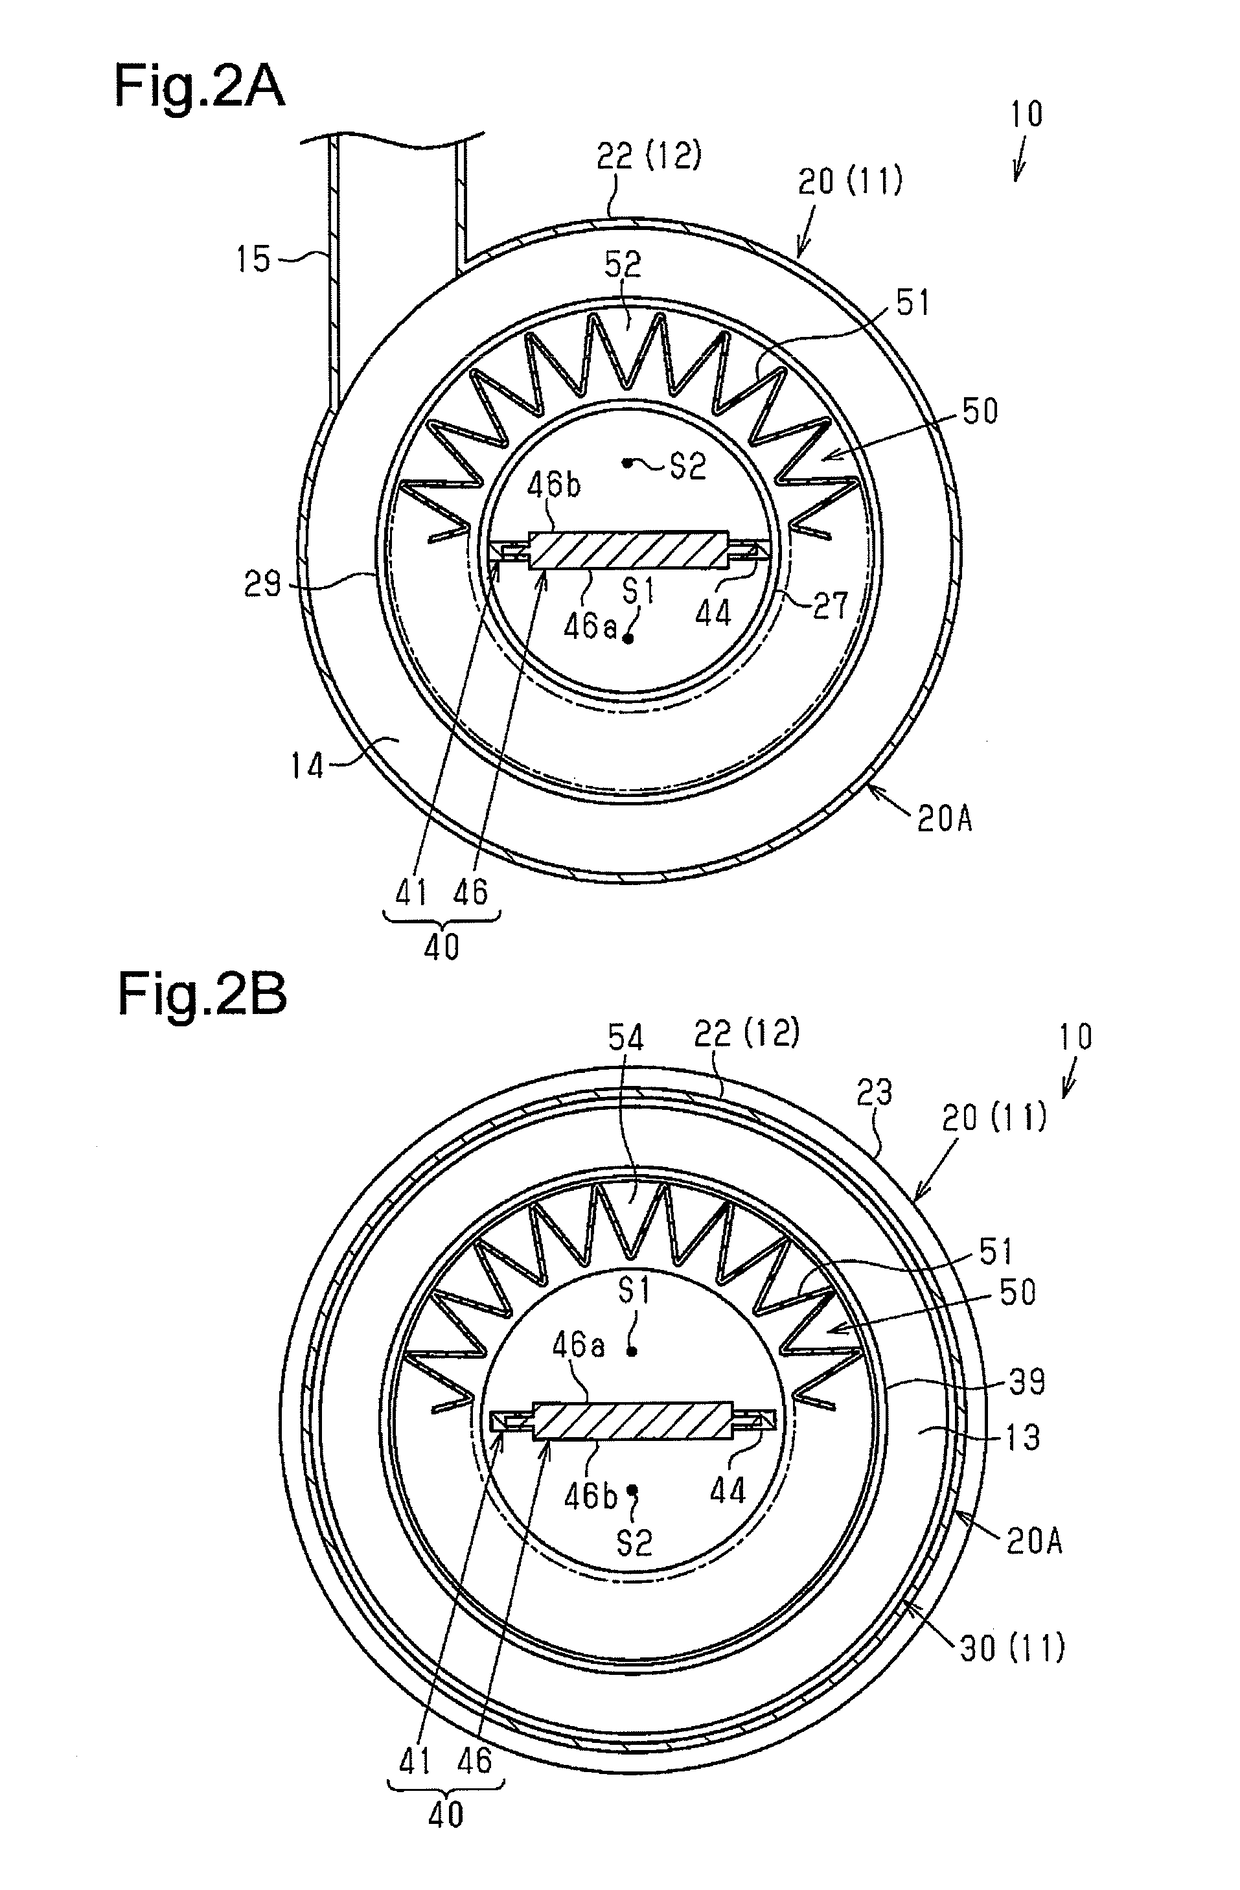 Cylindrical air cleaner for internal combustion engine